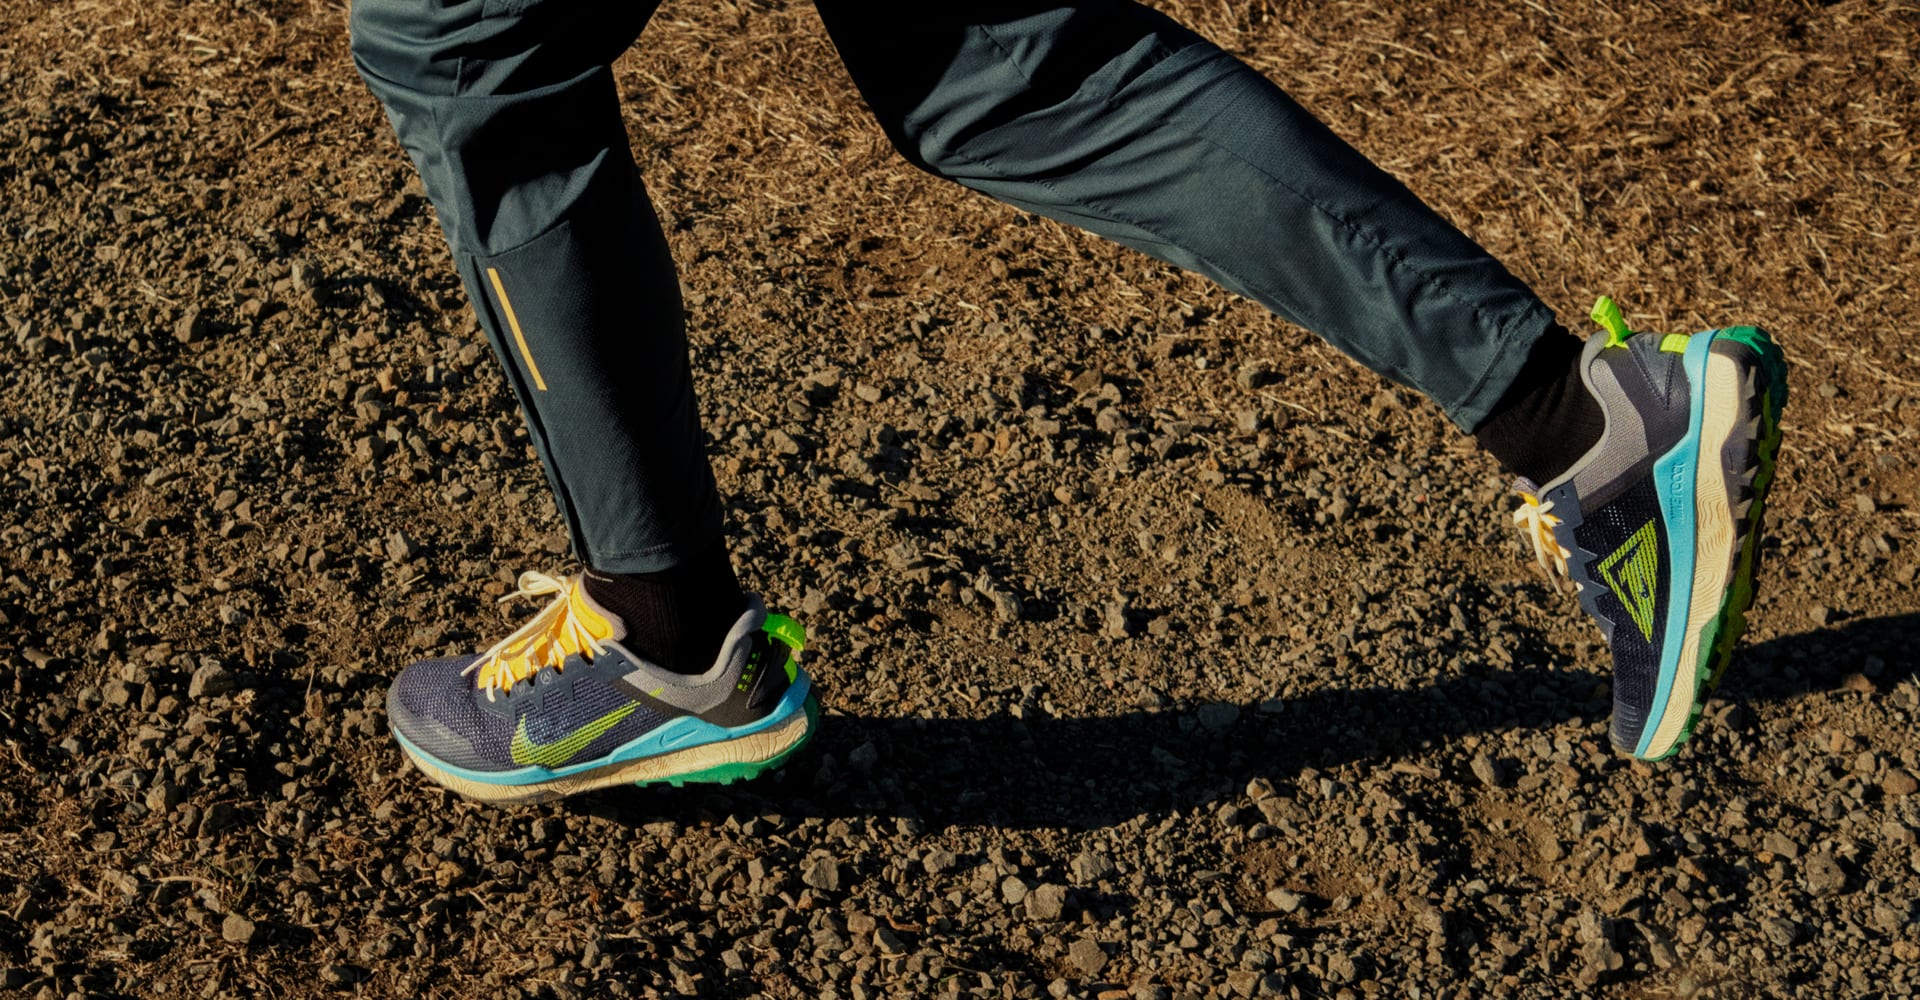 Nike Wildhorse 8 Review: The Shocking TRUTH About Off-Roading in These Sneakers!